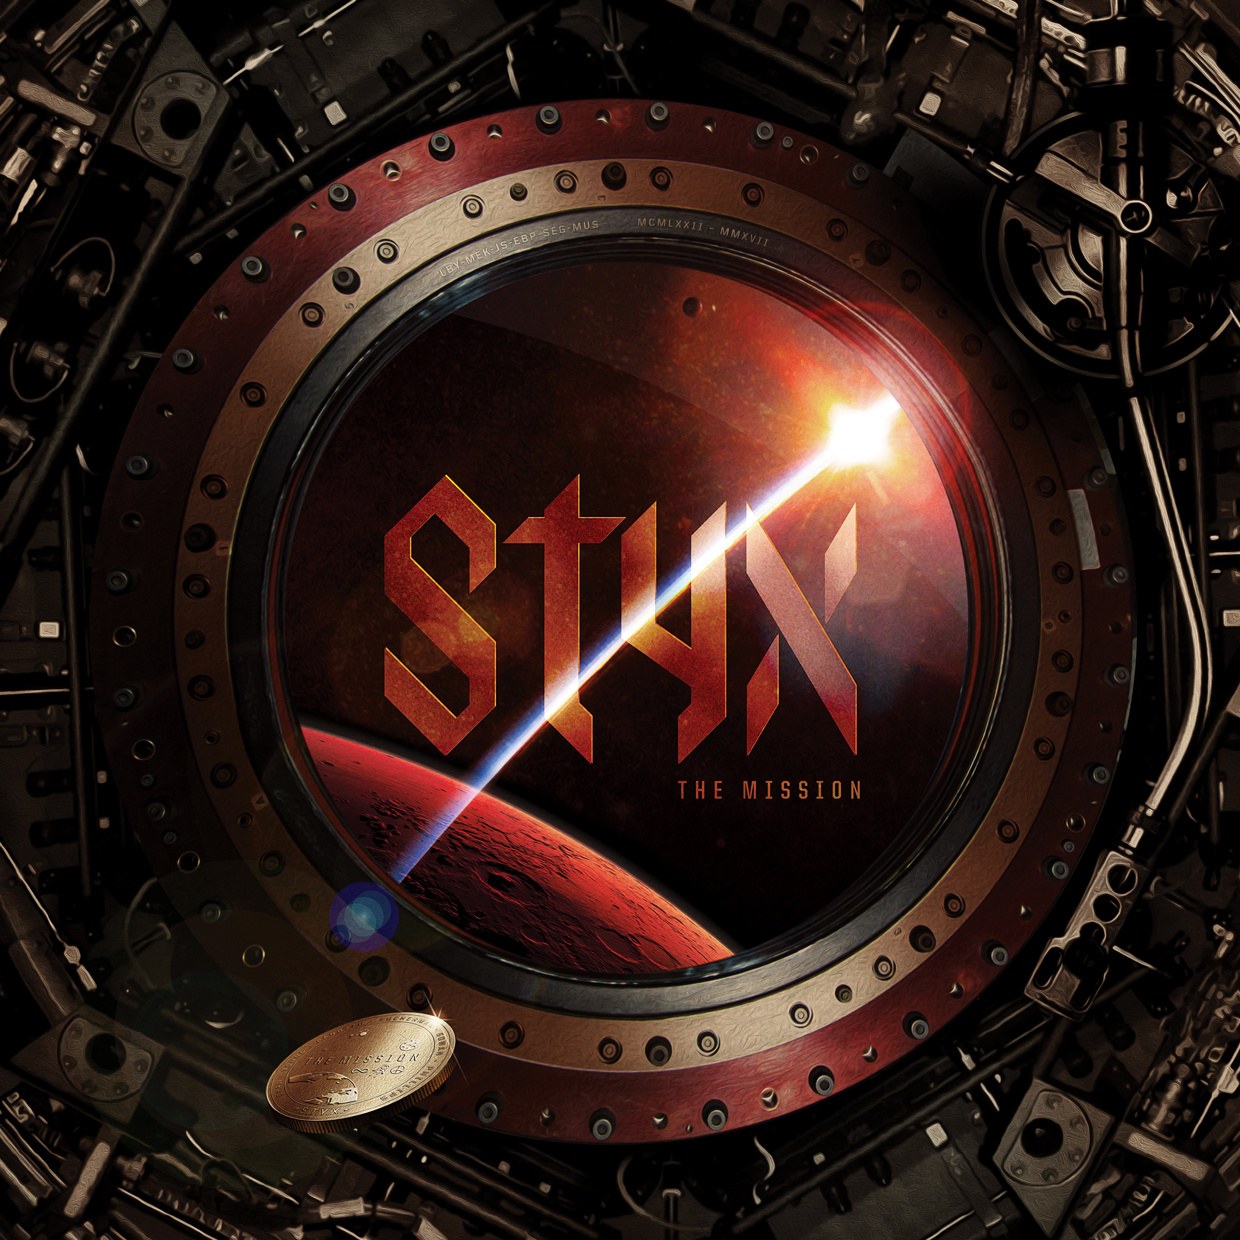 The Mission - STYX